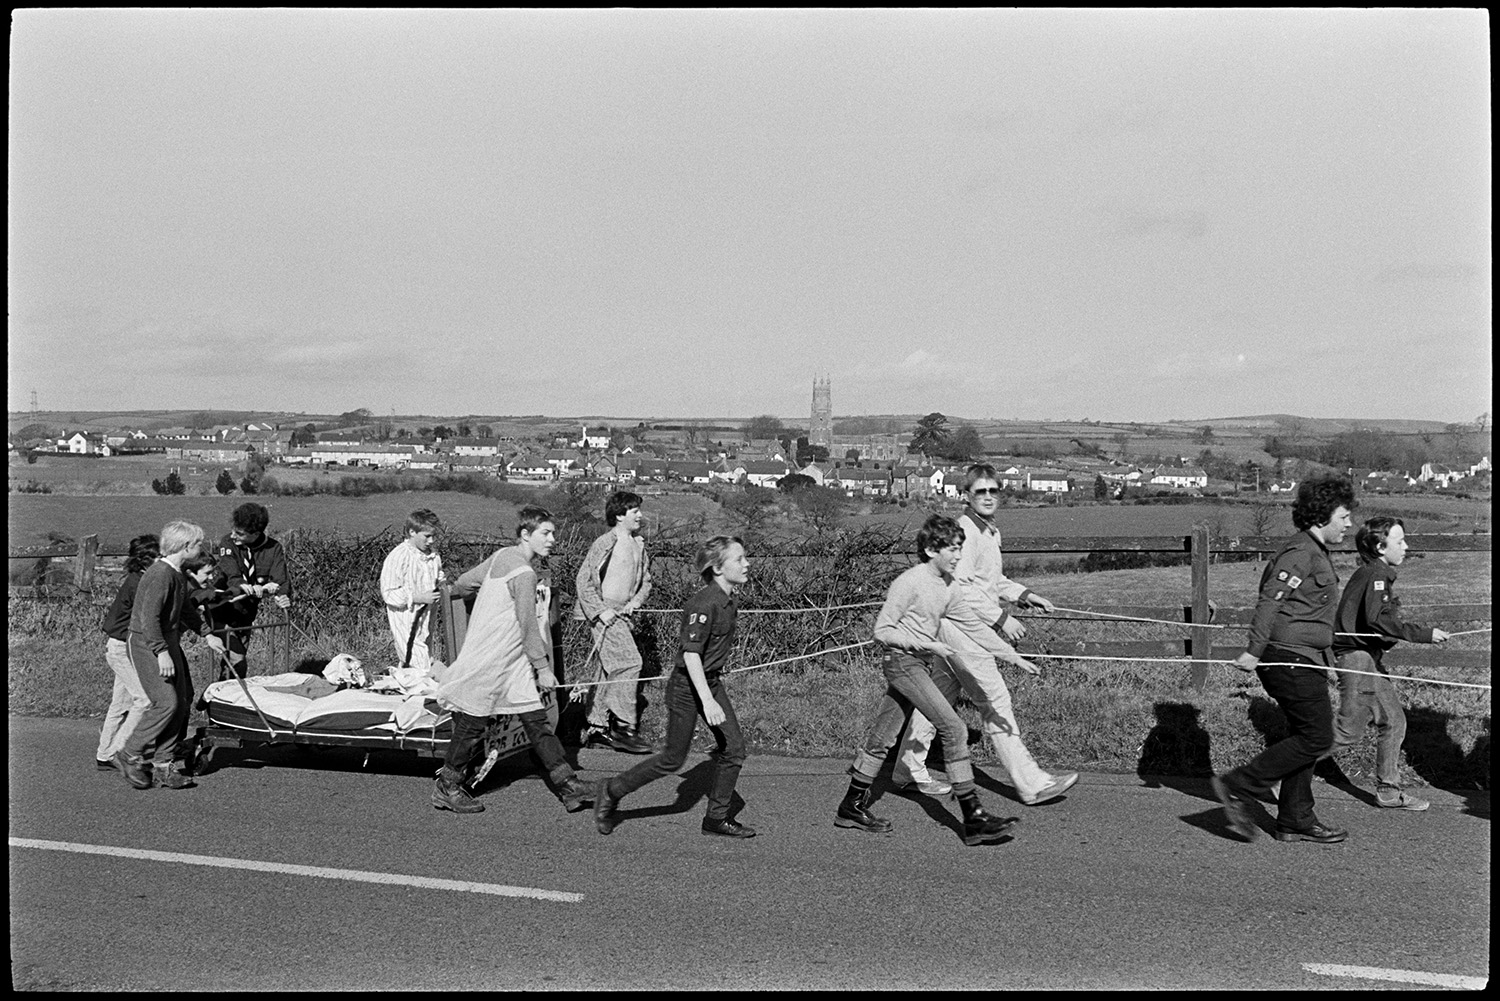 Scouts on sponsored walk pushing bed along country road to South Molton. 
[A group of Scouts on a 7 mile sponsored walk pushing and pulling a make-shift bed on wheels, along a road near Chittlehampton, with the town in the background. Some of the children are in fancy dress. Chittlehampton Church can be seen in the background.]